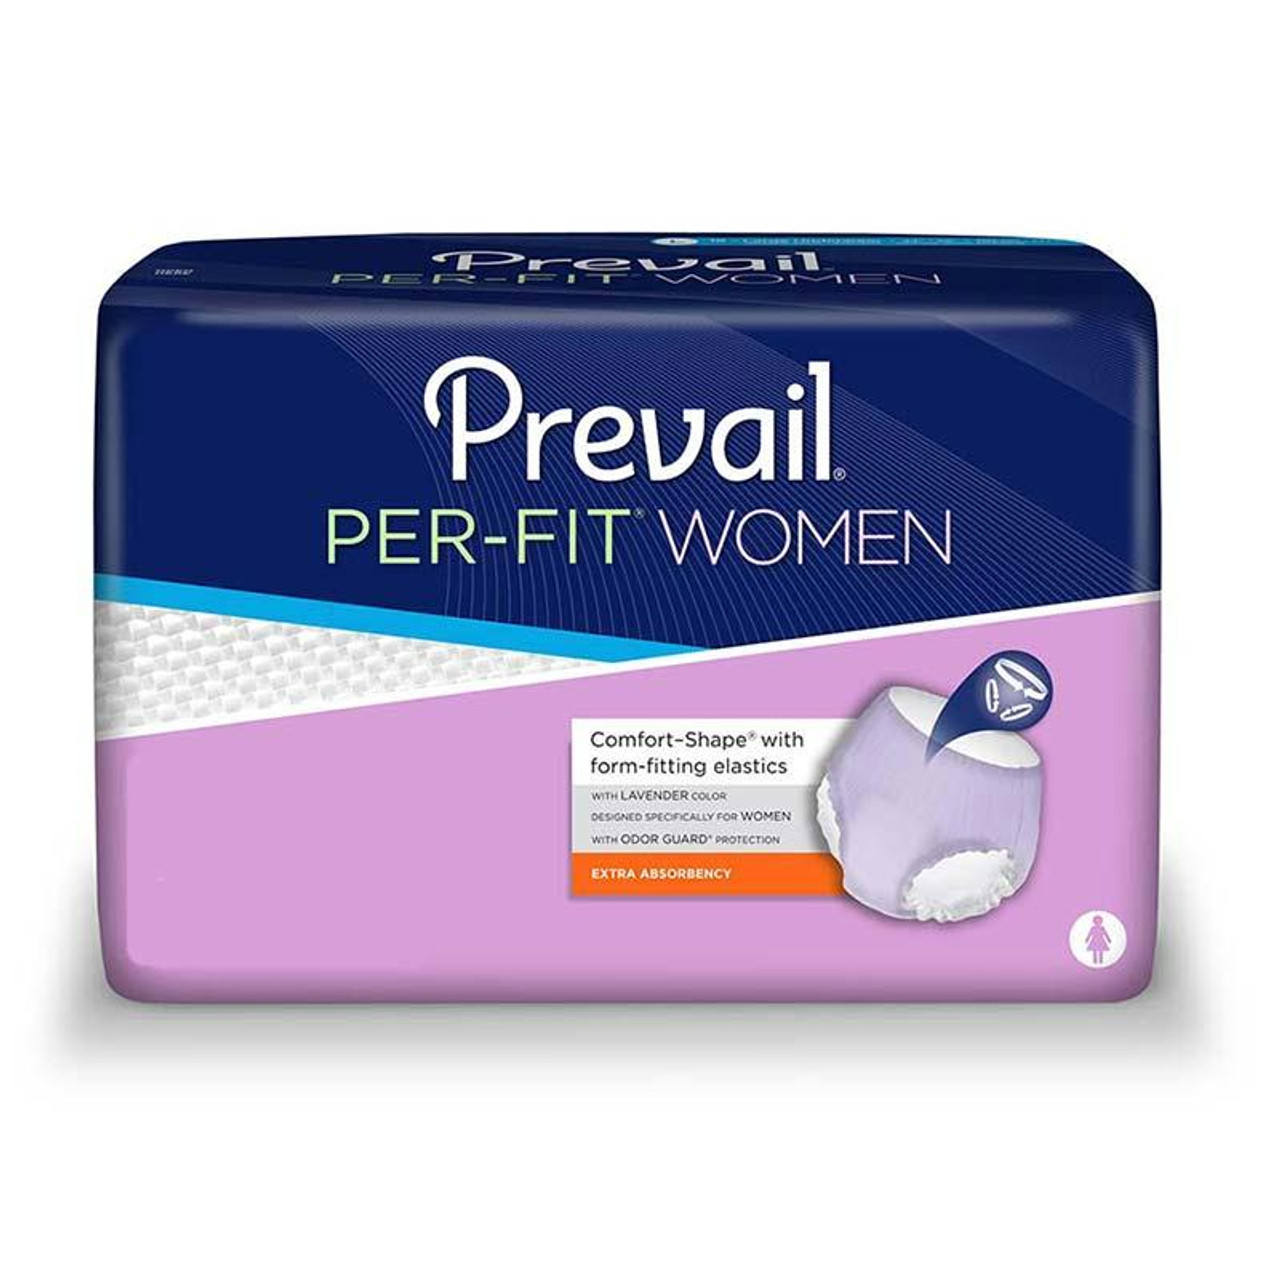 Prevail Per-fit Protective Underwear For Women, Large Fits 44 - 58